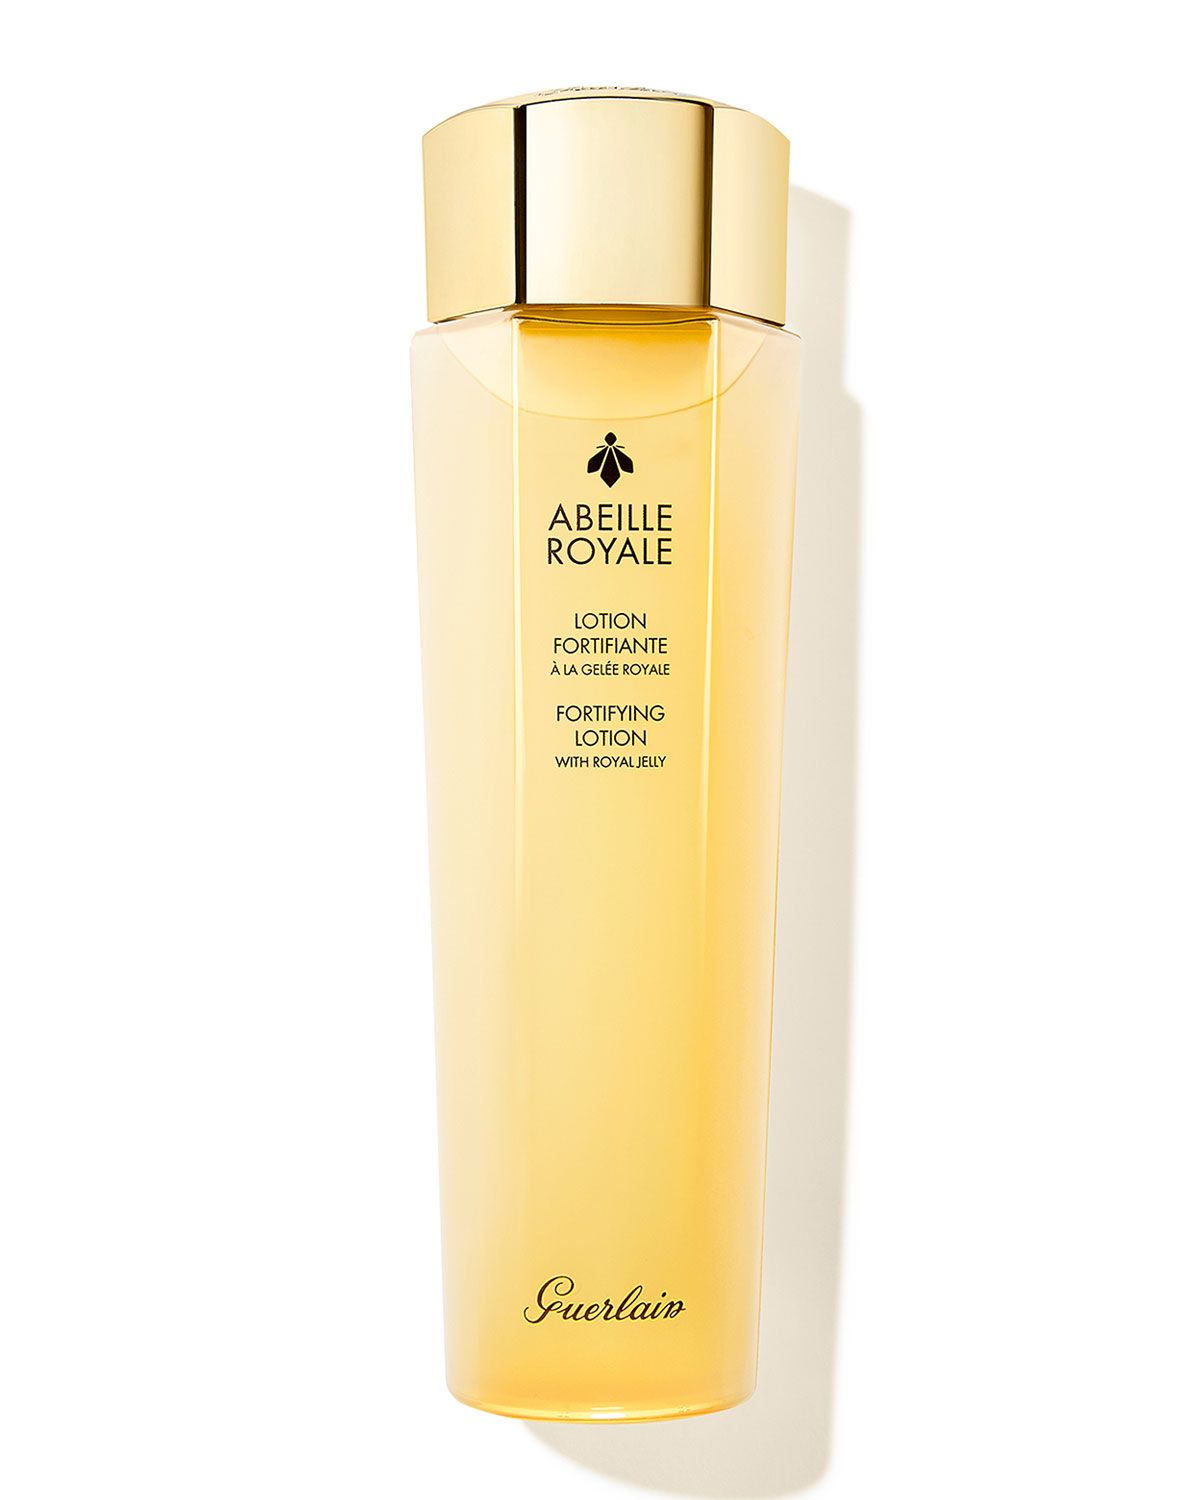 5 oz. Abeille Royale Anti-Aging Fortifying Lotion Toner | Neiman Marcus